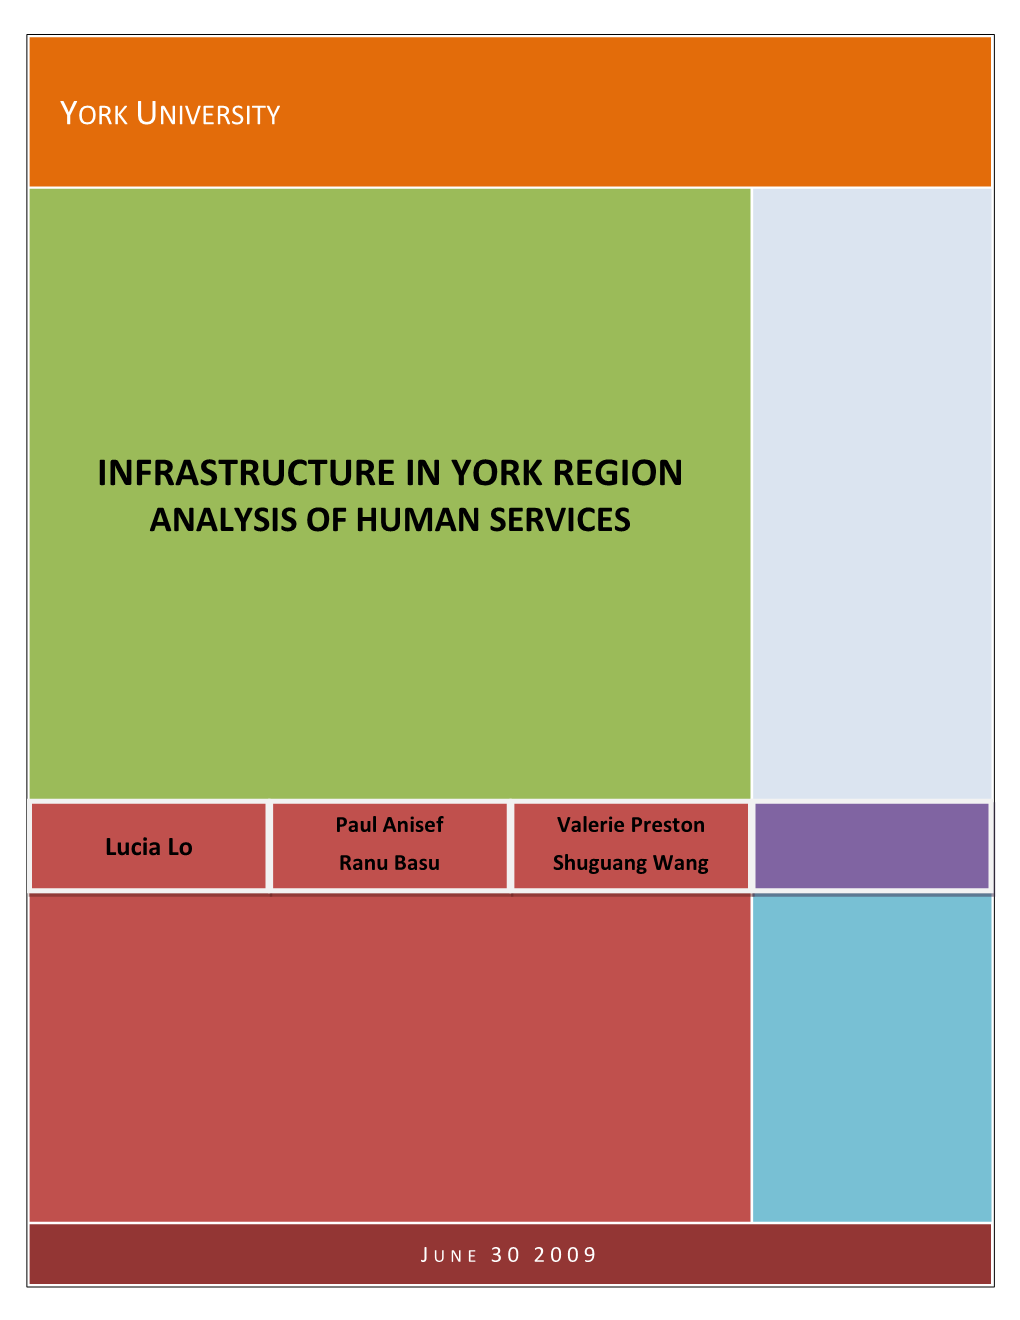 Infrastructure in York Region Analysis of Human Services